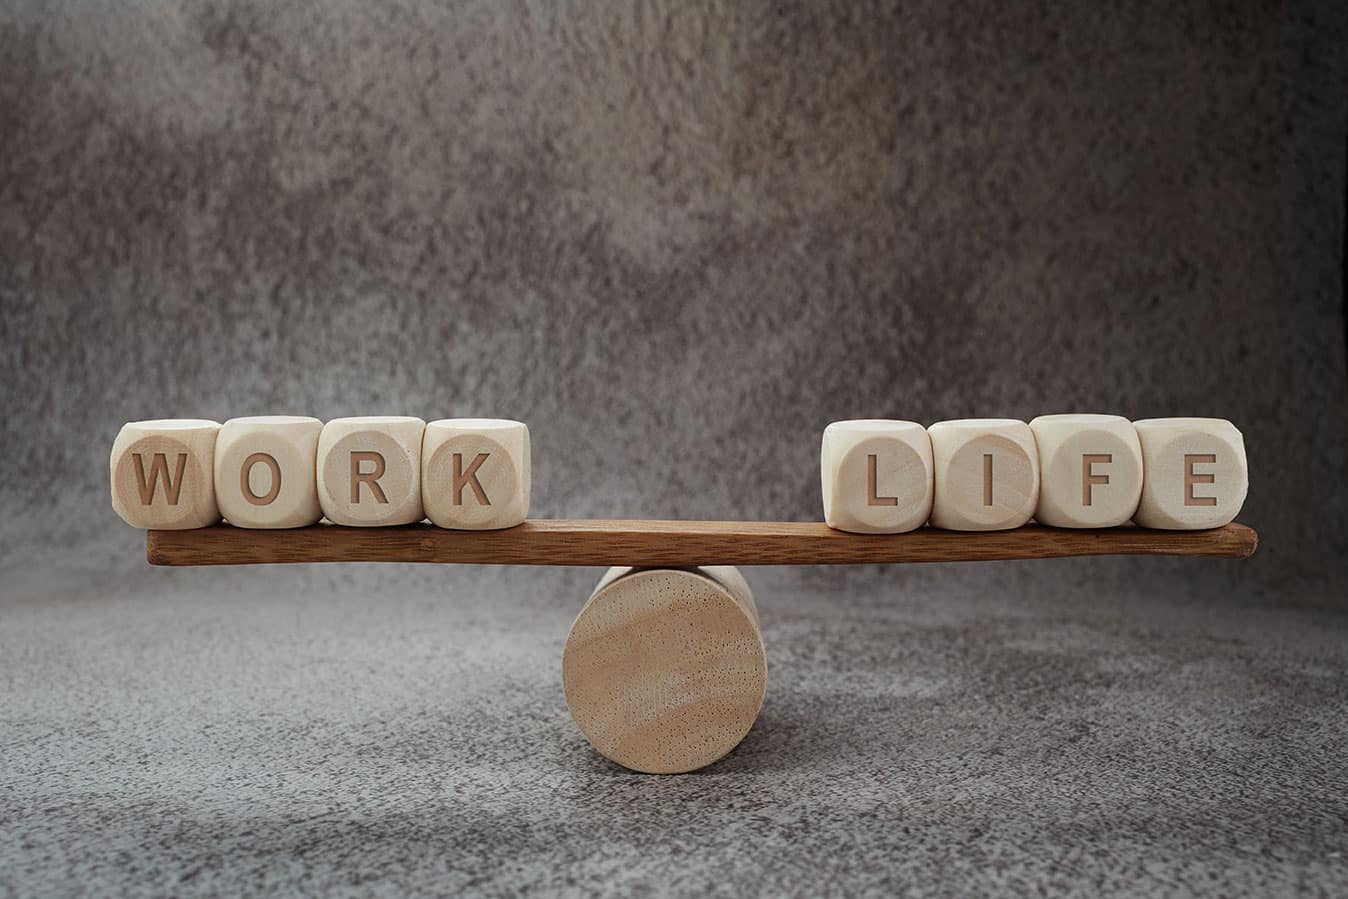 The words "work" and "life" balancing on either ends of a wooden balance scale.